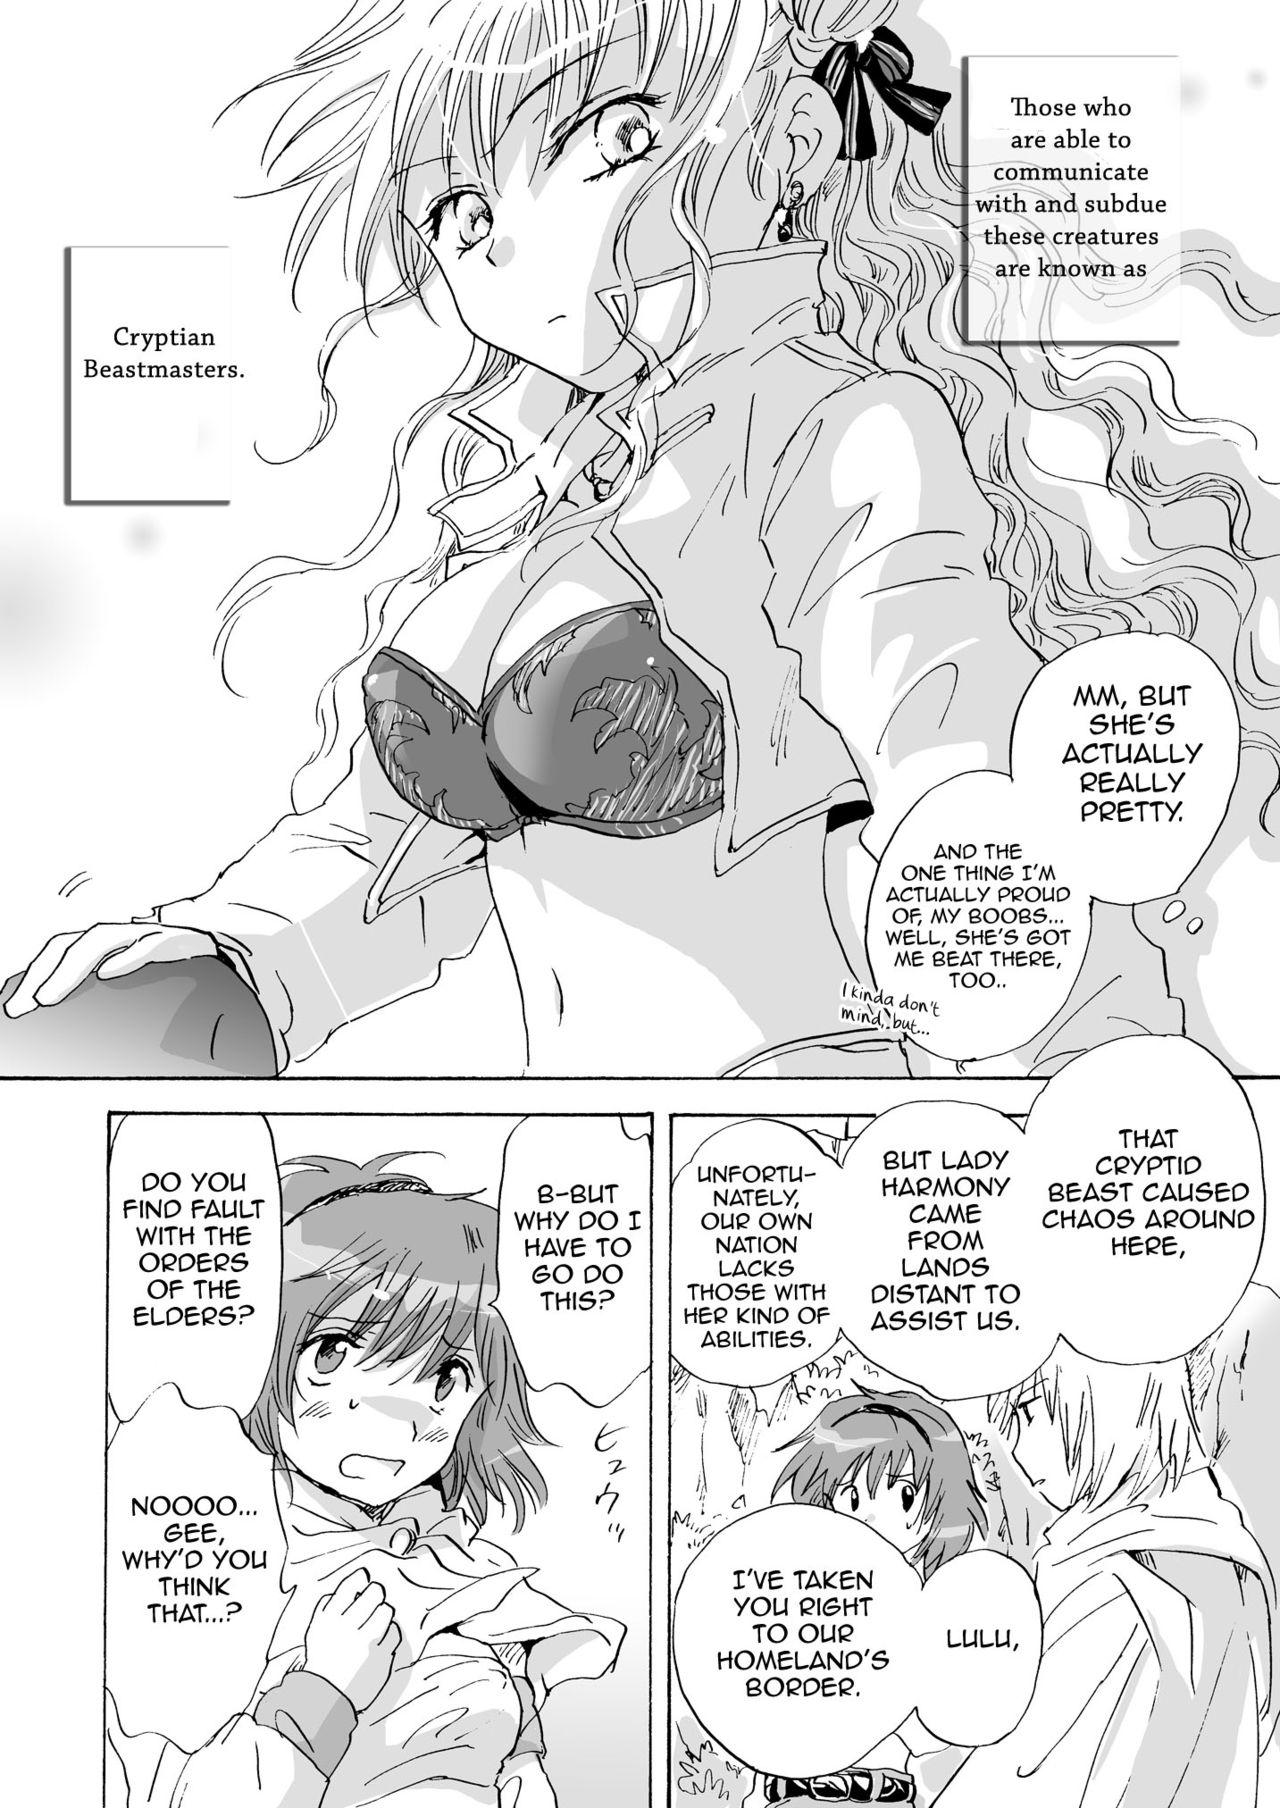 Black Thugs Cutie Beast Complete Edition Ch. 1-2 Kiss - Page 7